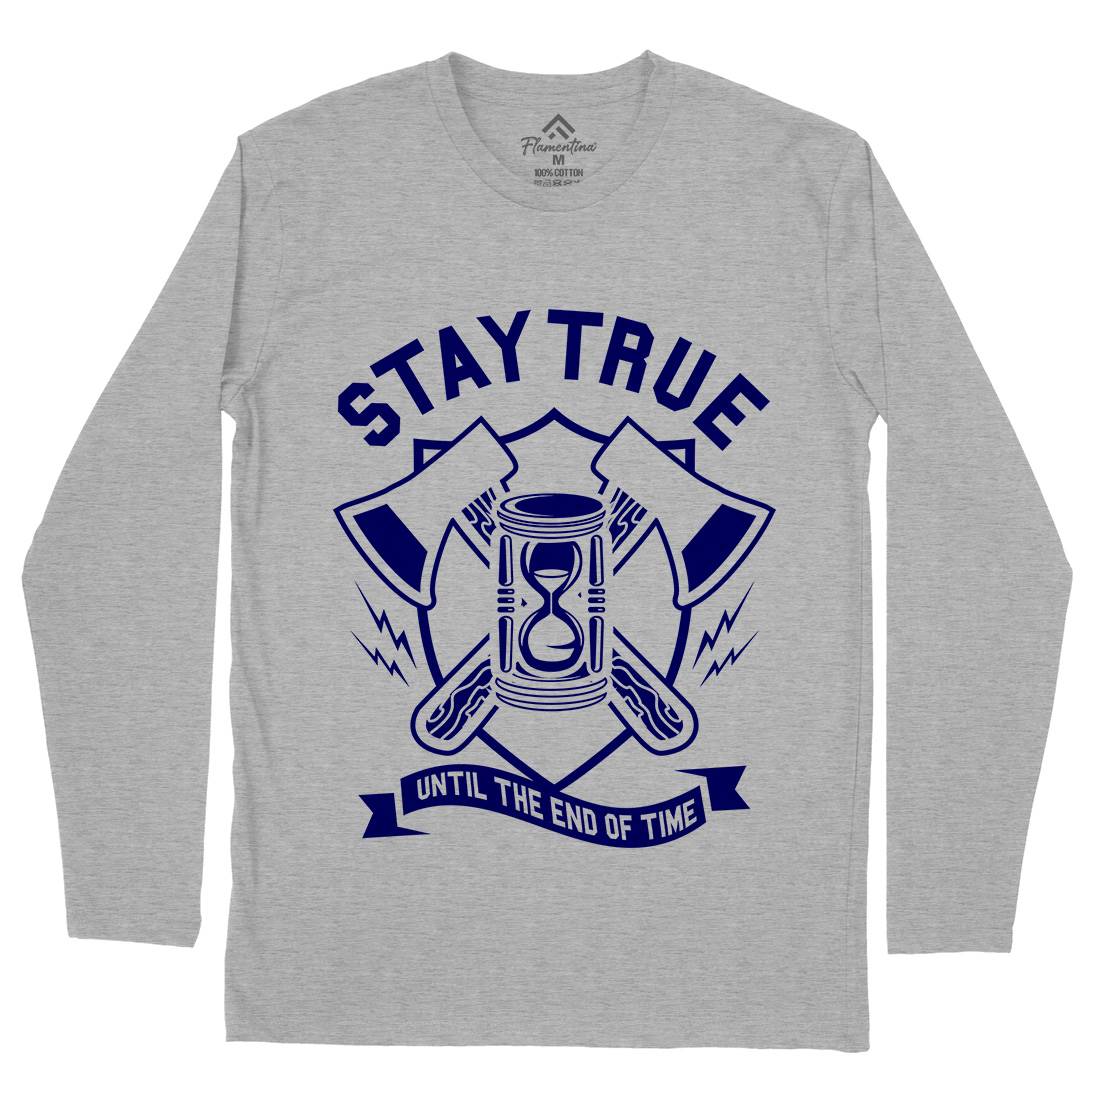 Stay True Mens Long Sleeve T-Shirt Quotes A285